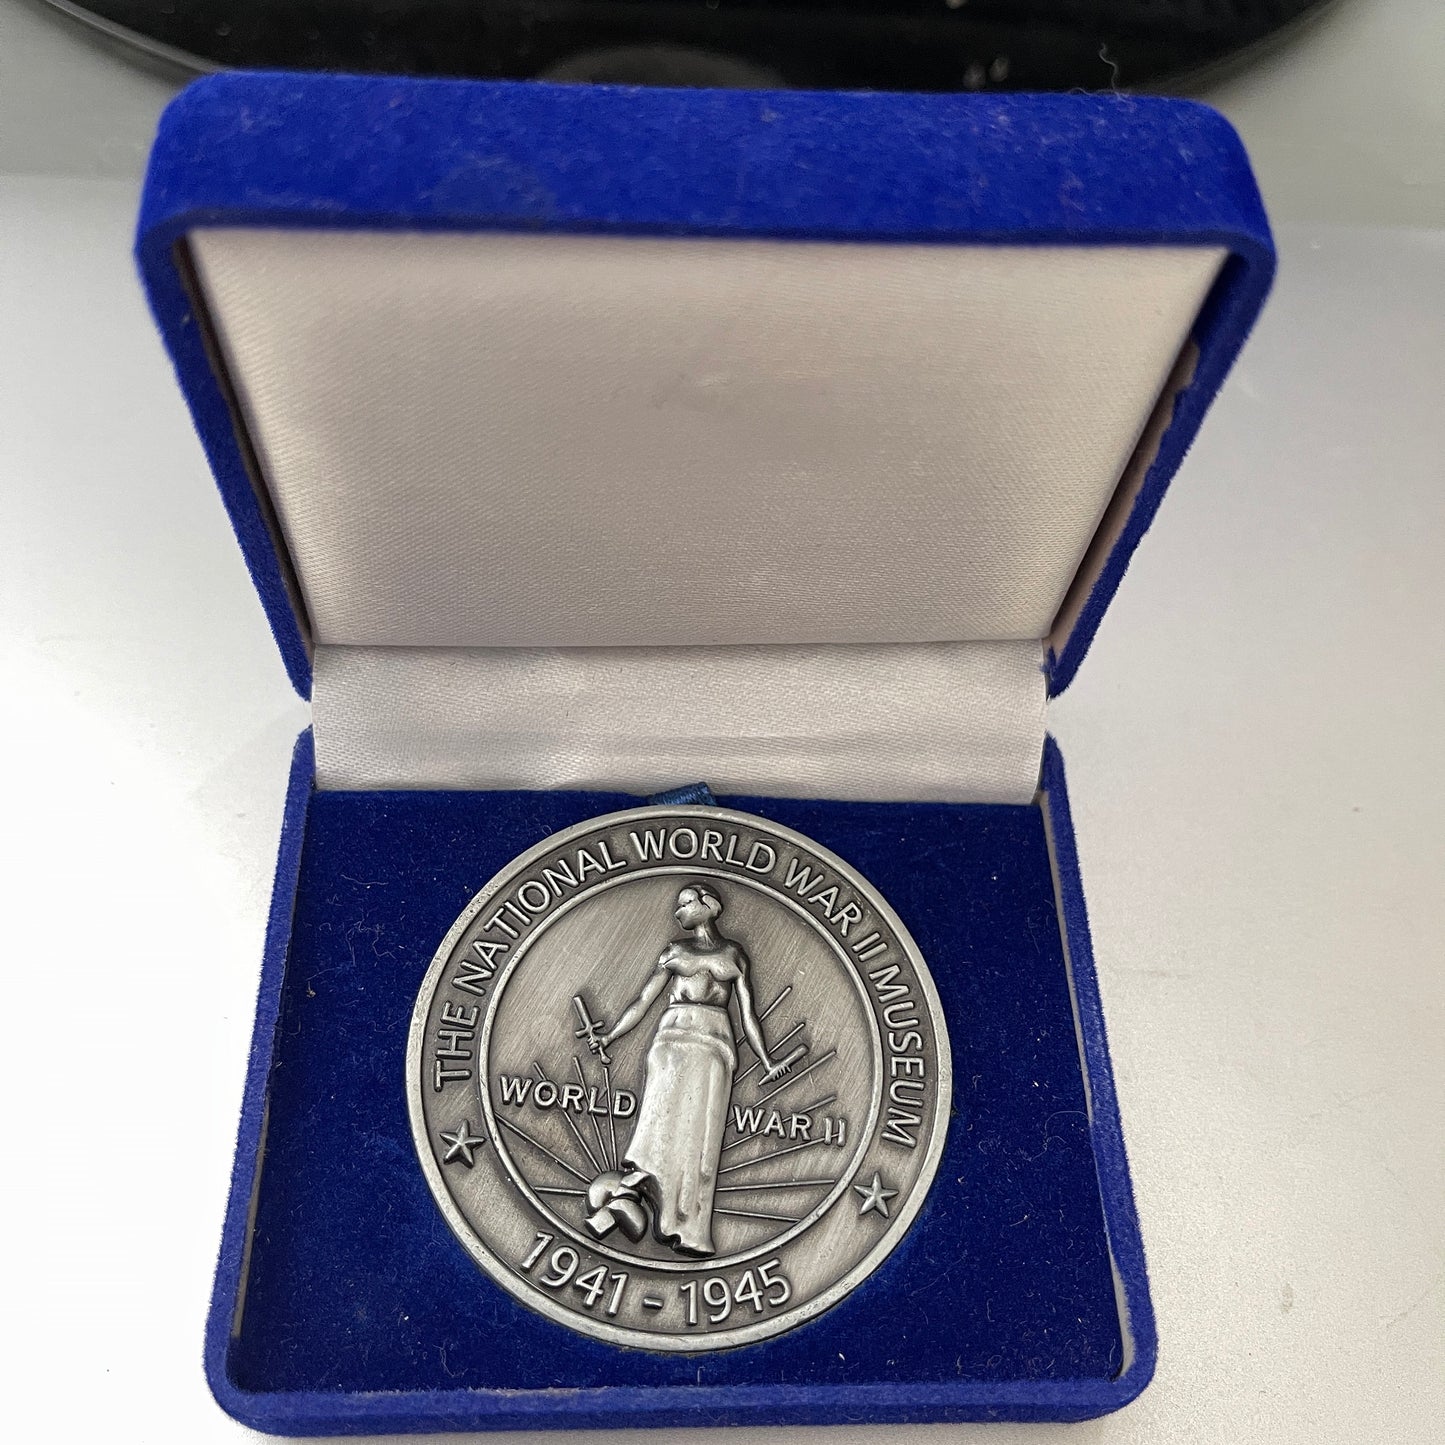 The National World War II Museum Charter Member challenge Coin Vintage Commemorative Collectible